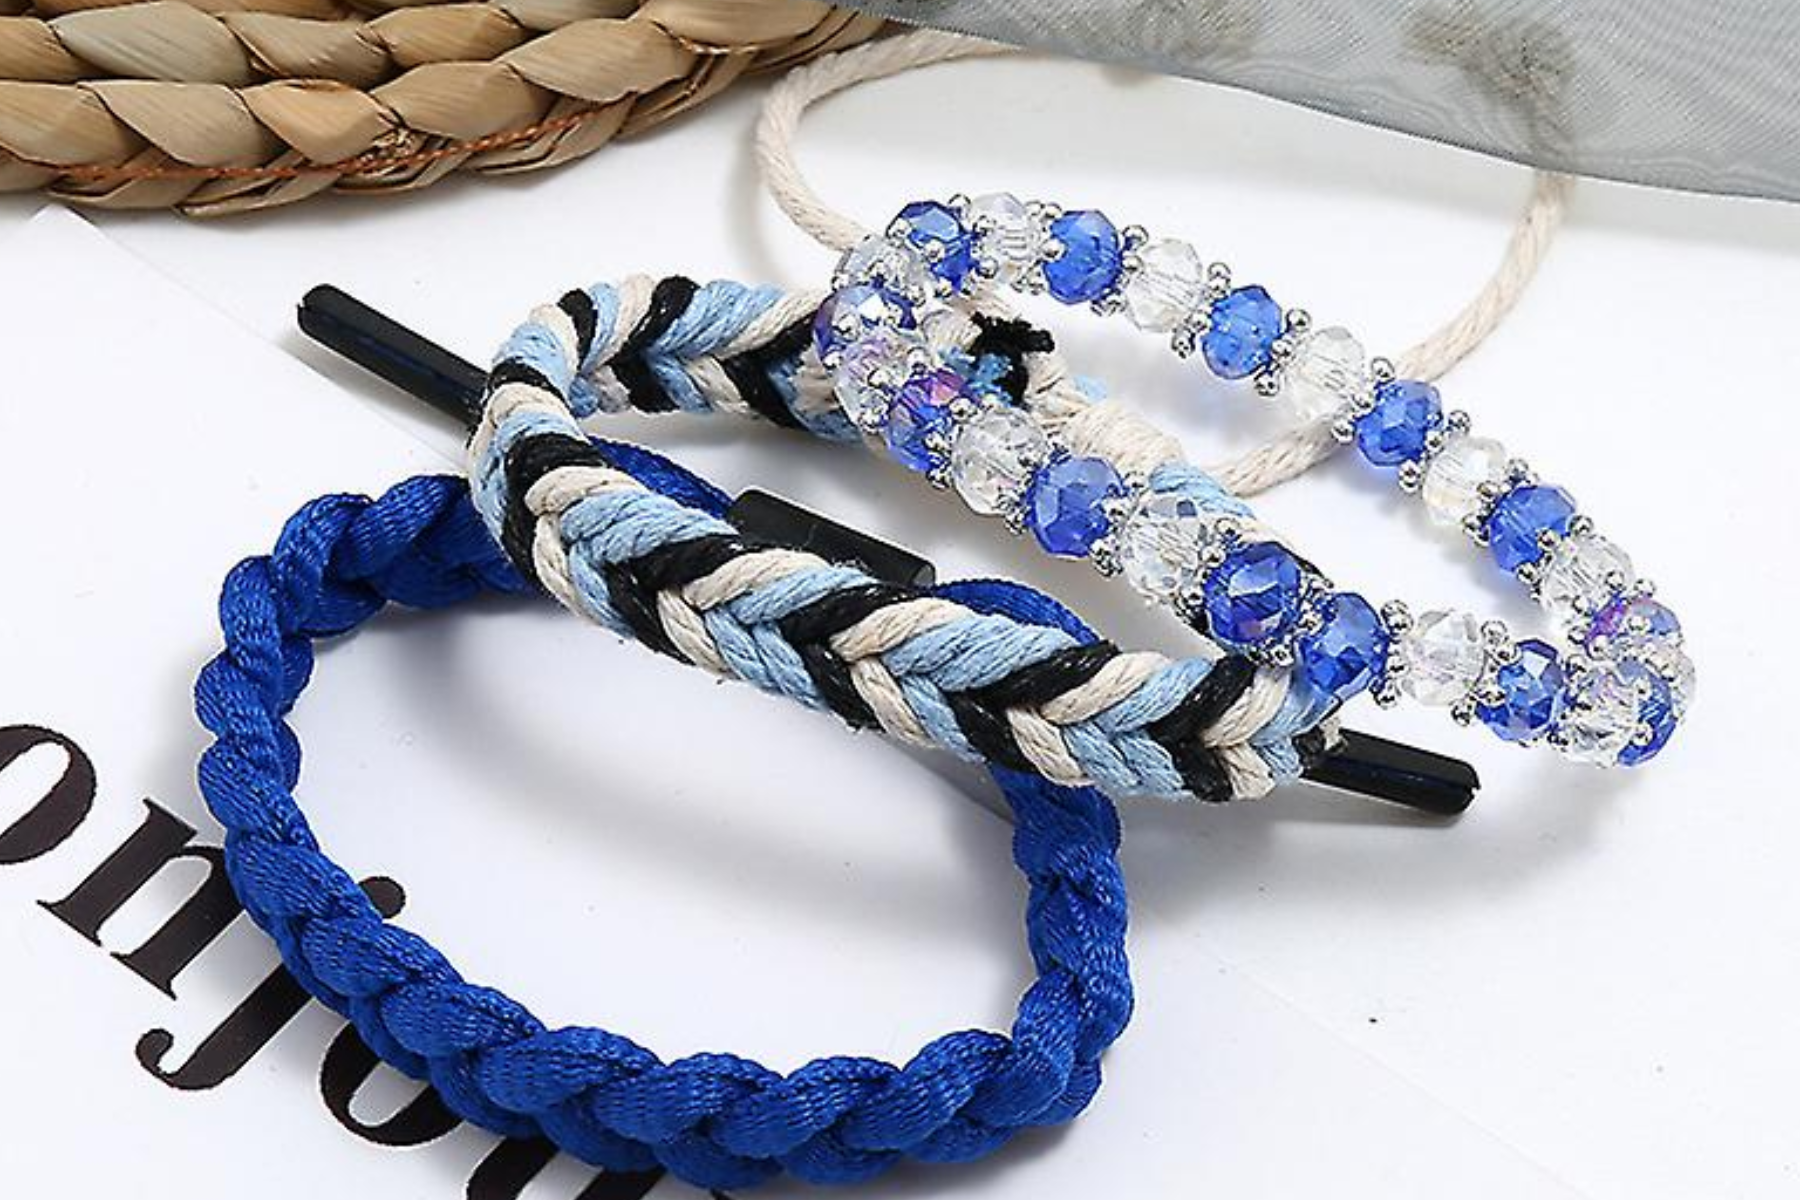 Braided Bracelets Jewelry - DIY Tips And Techniques